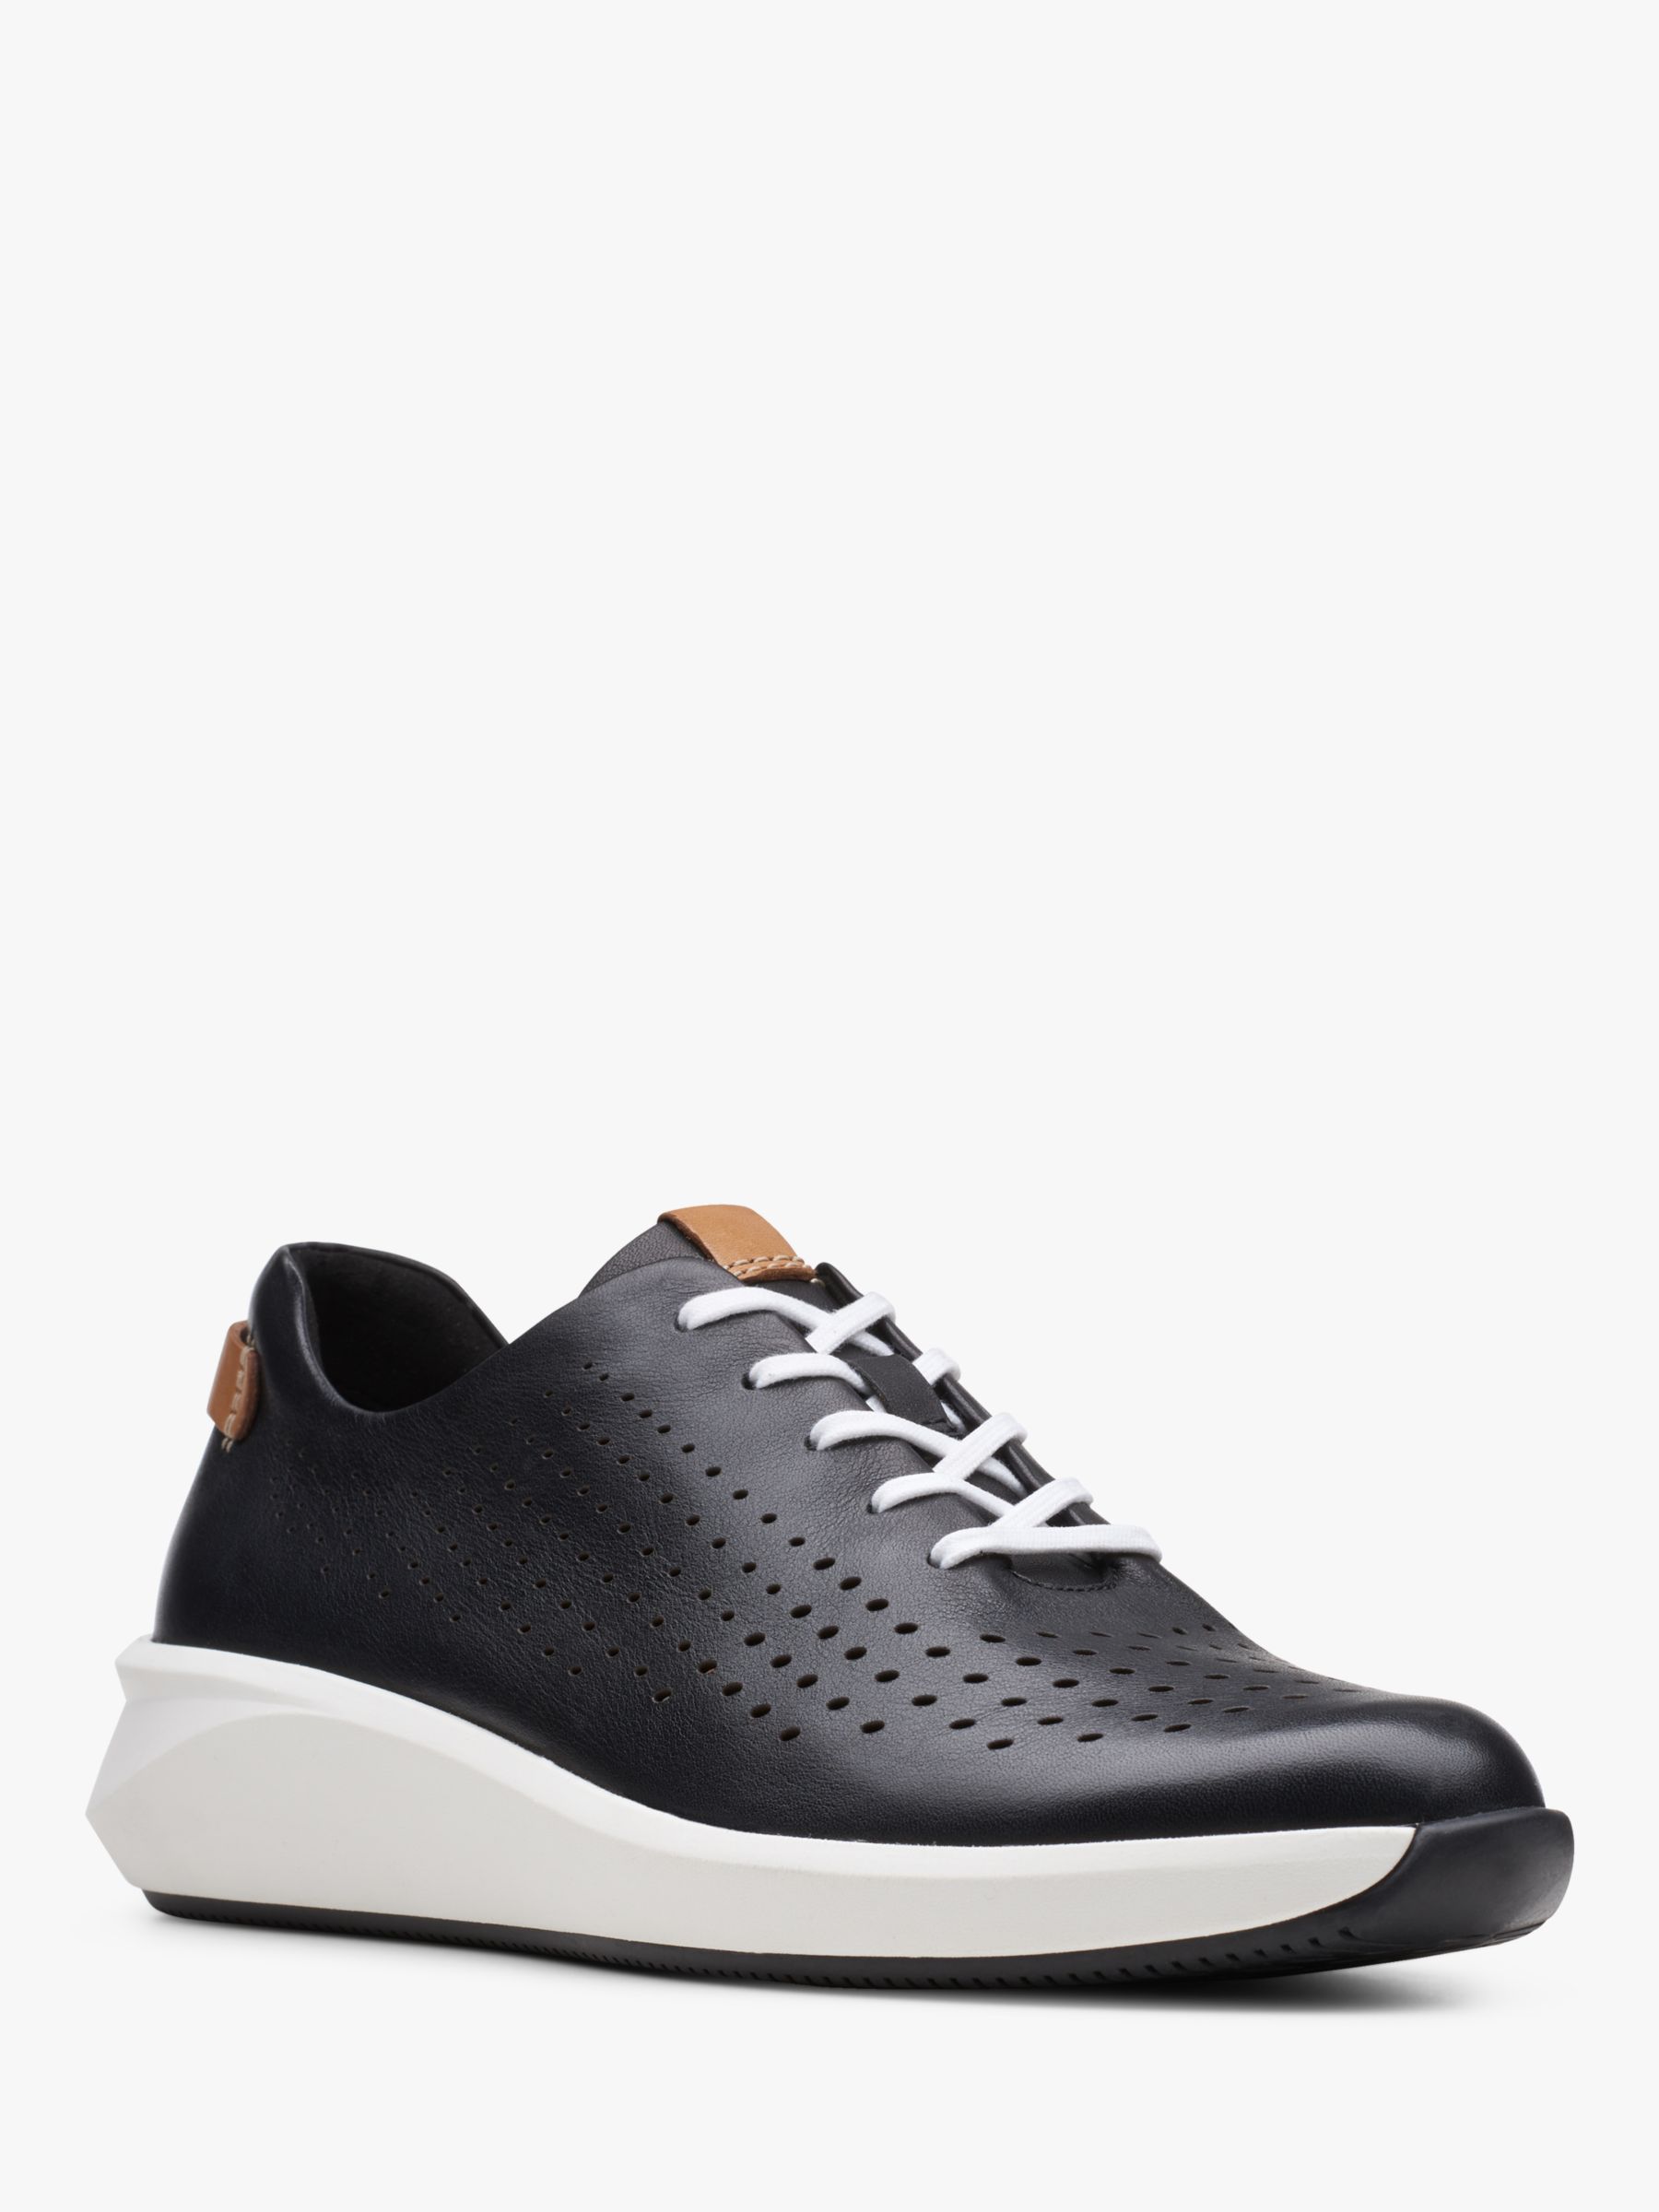 clarks black leather trainers